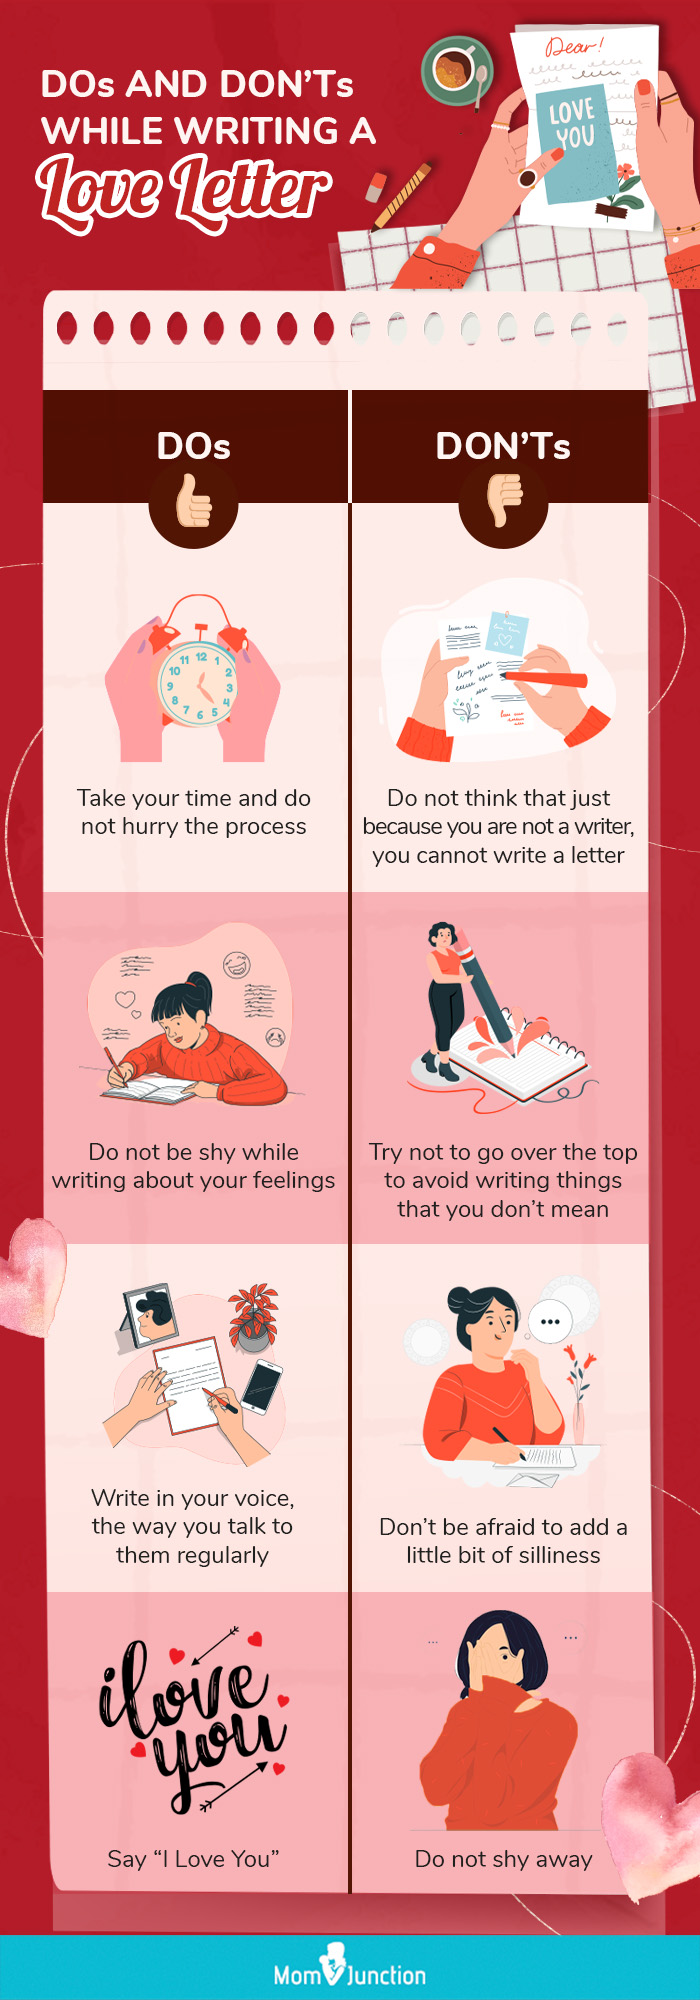 dos and donts while writing a love letter (infographic)